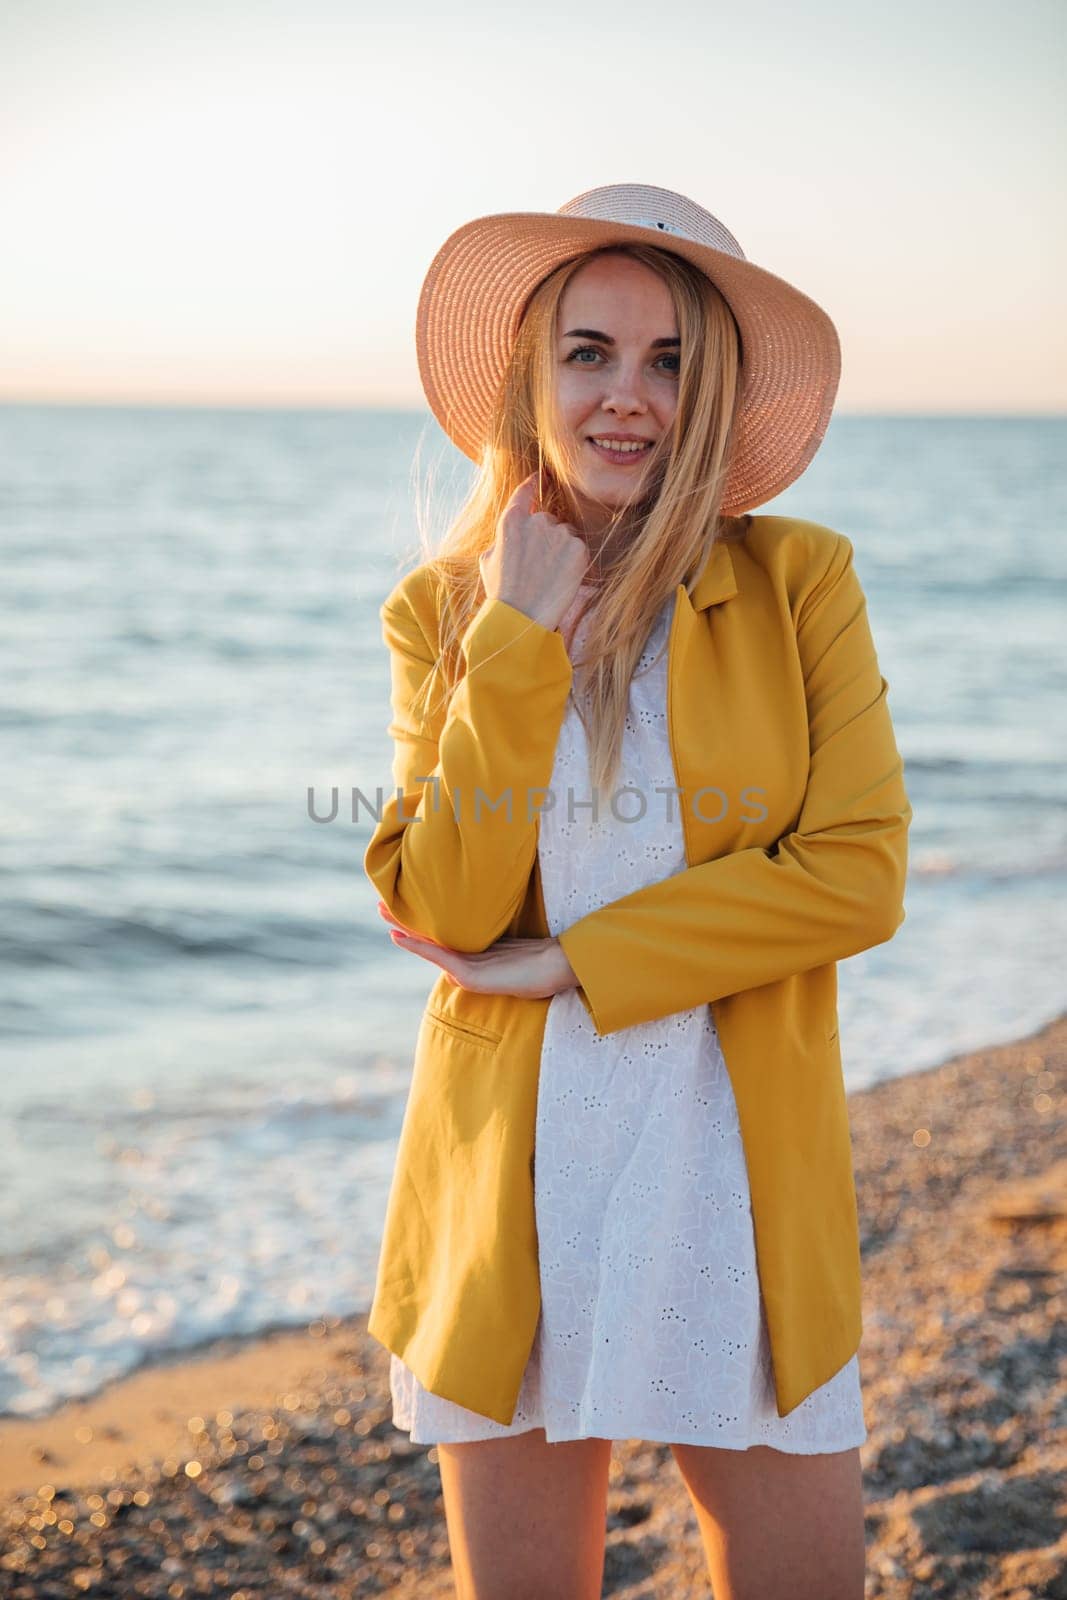 blonde woman in a hat on a walk by the sea on the shore Rest